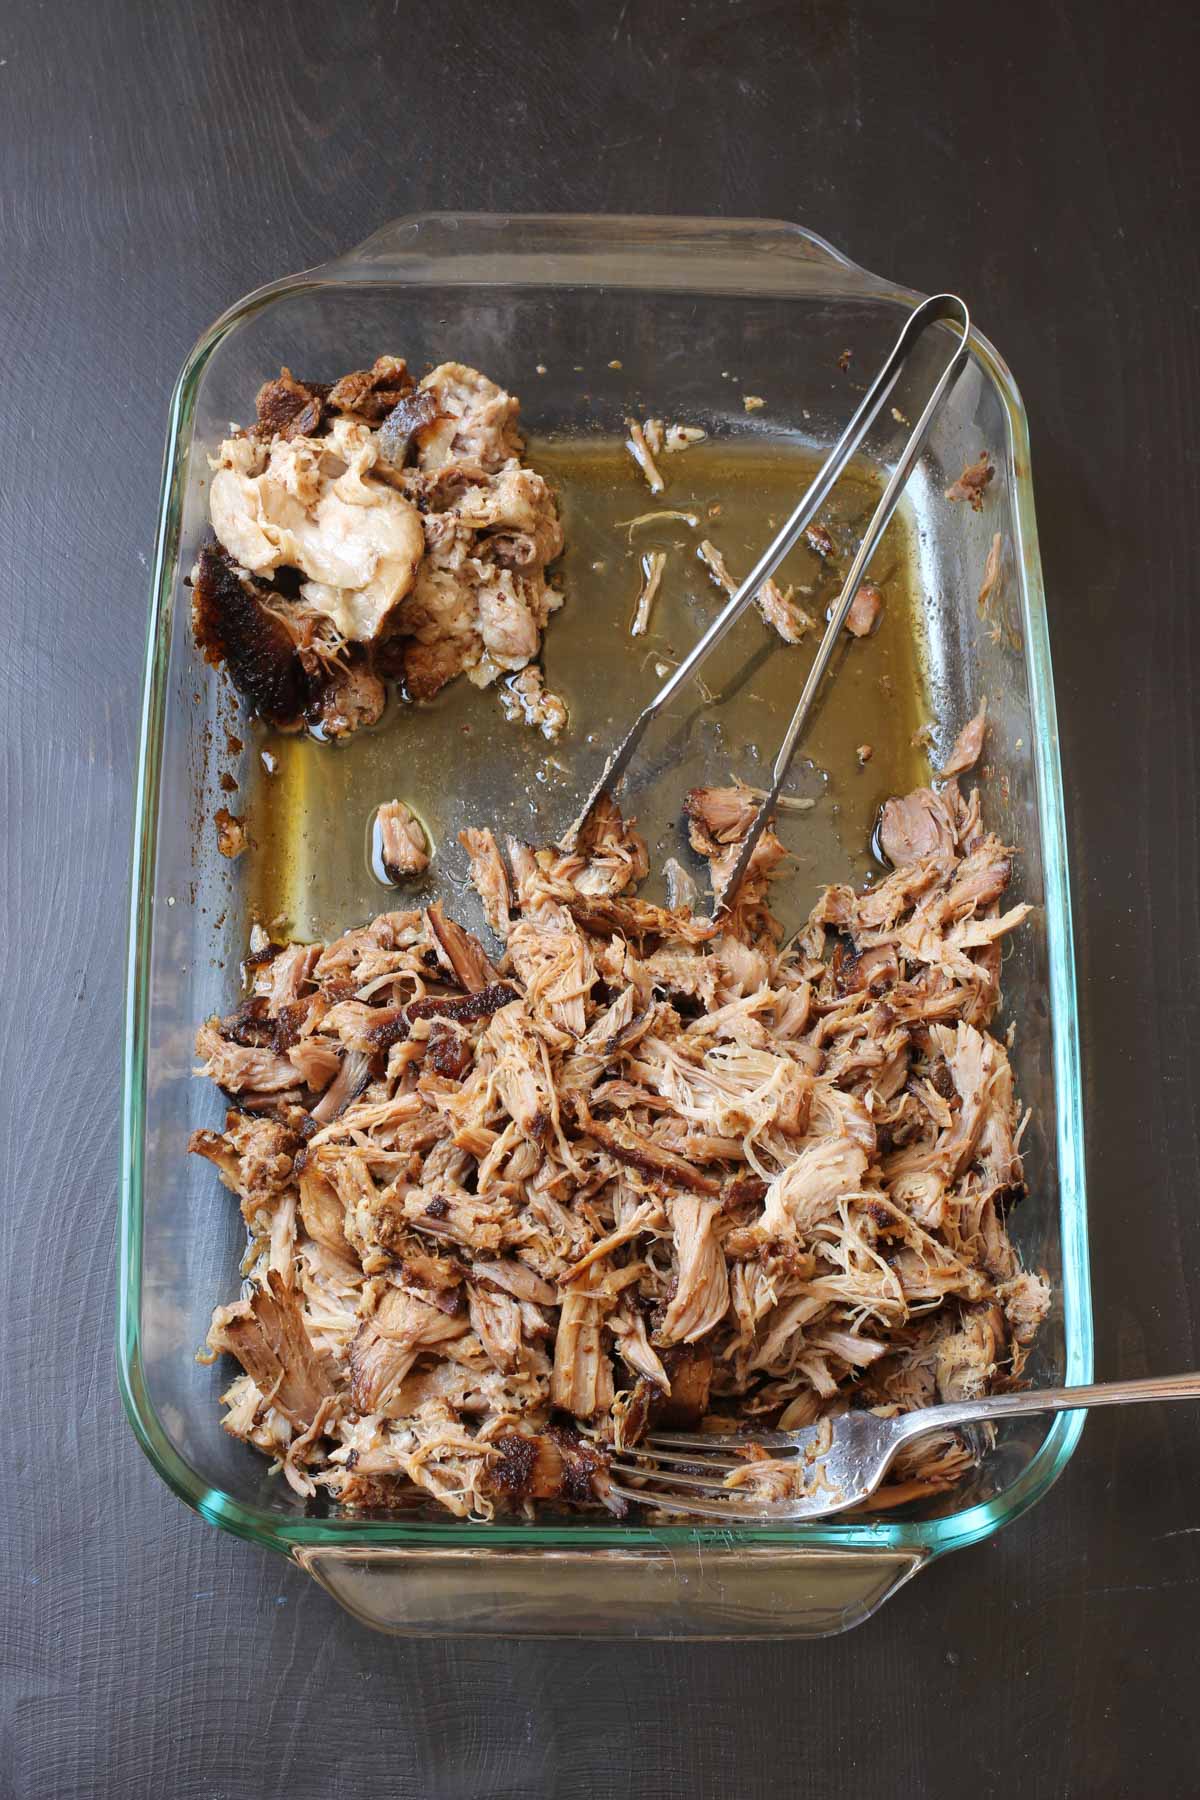 pulled pork in a glass dish